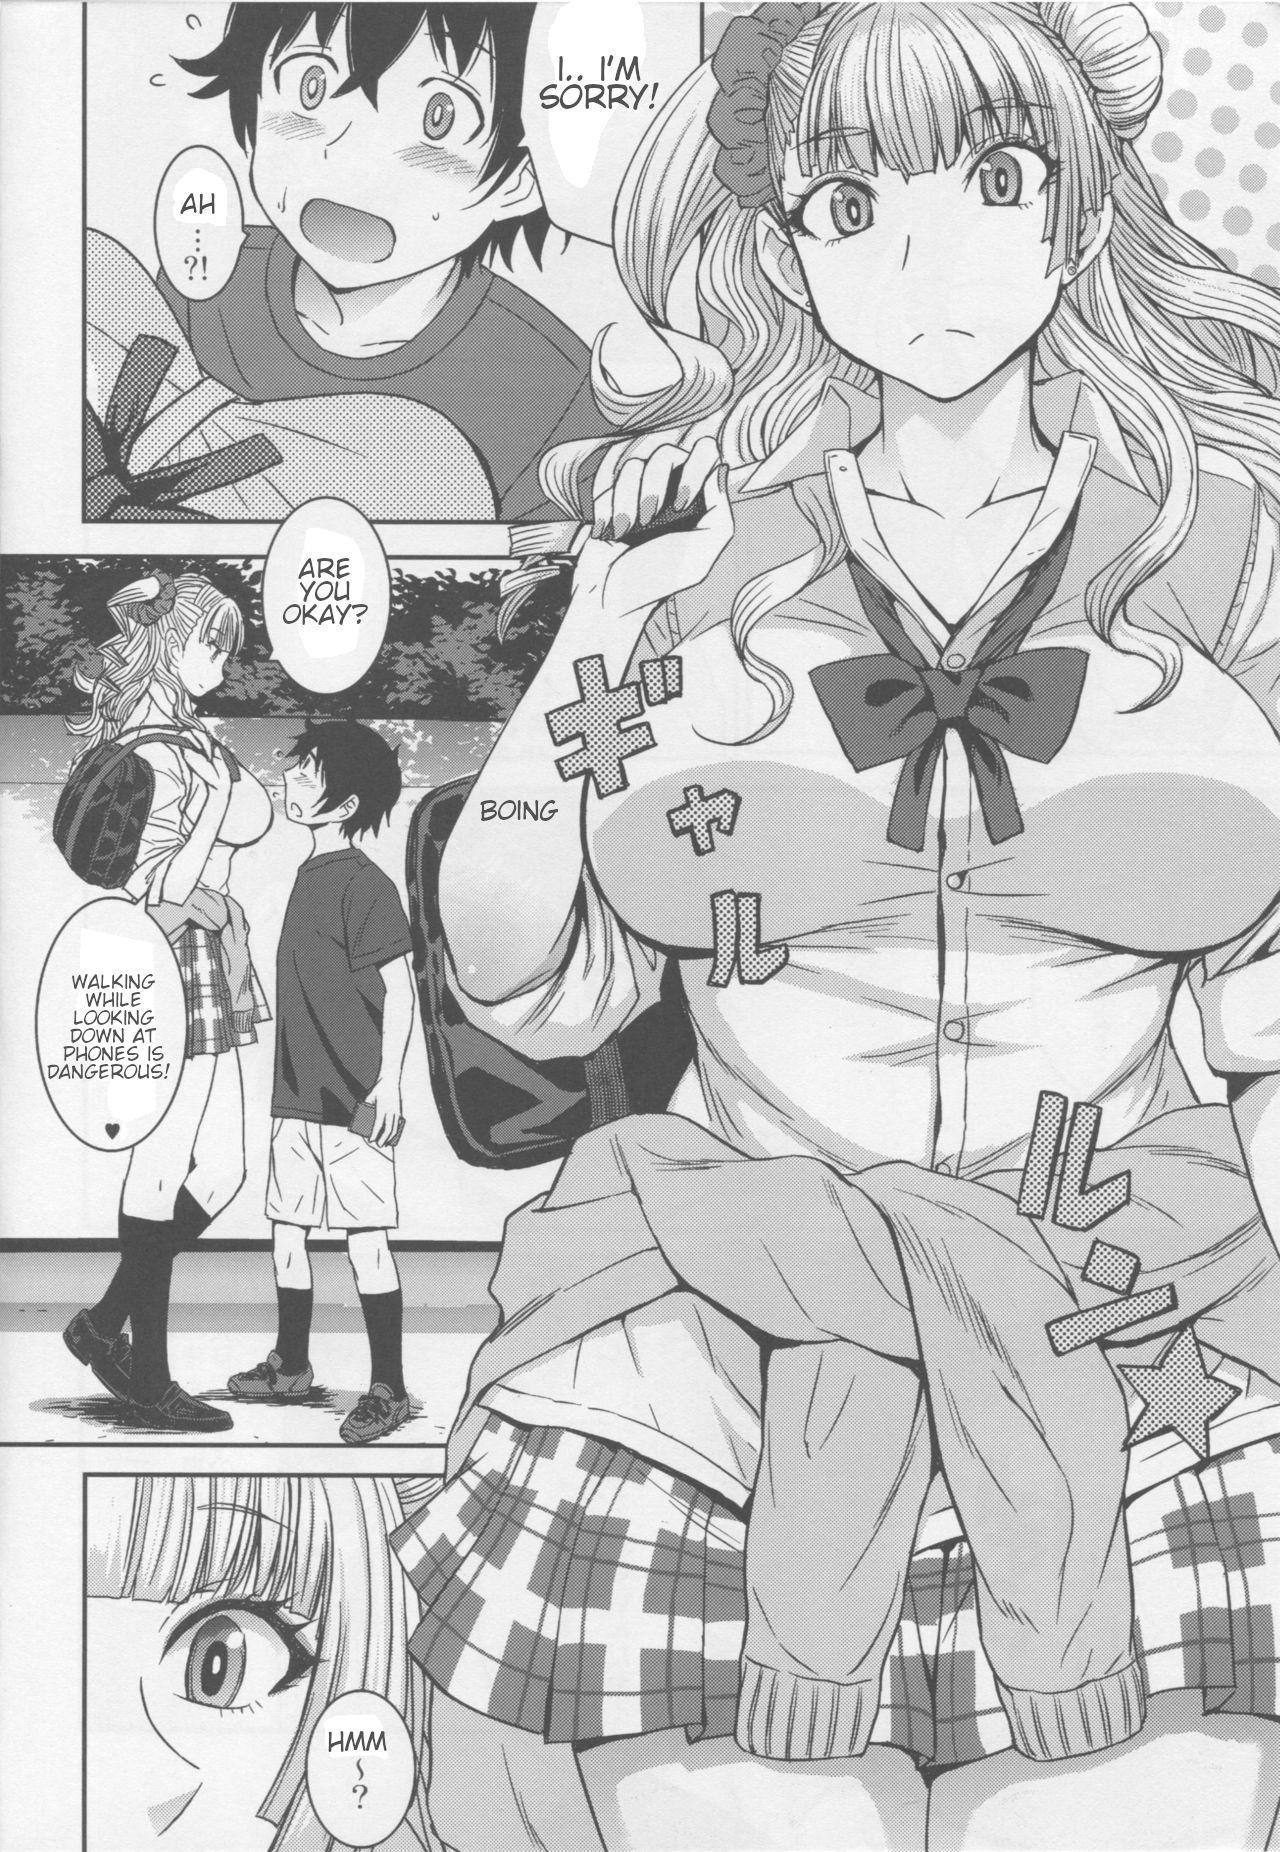 Horny Sluts Boy Meets Gal - Oshiete galko-chan Blondes - Page 3